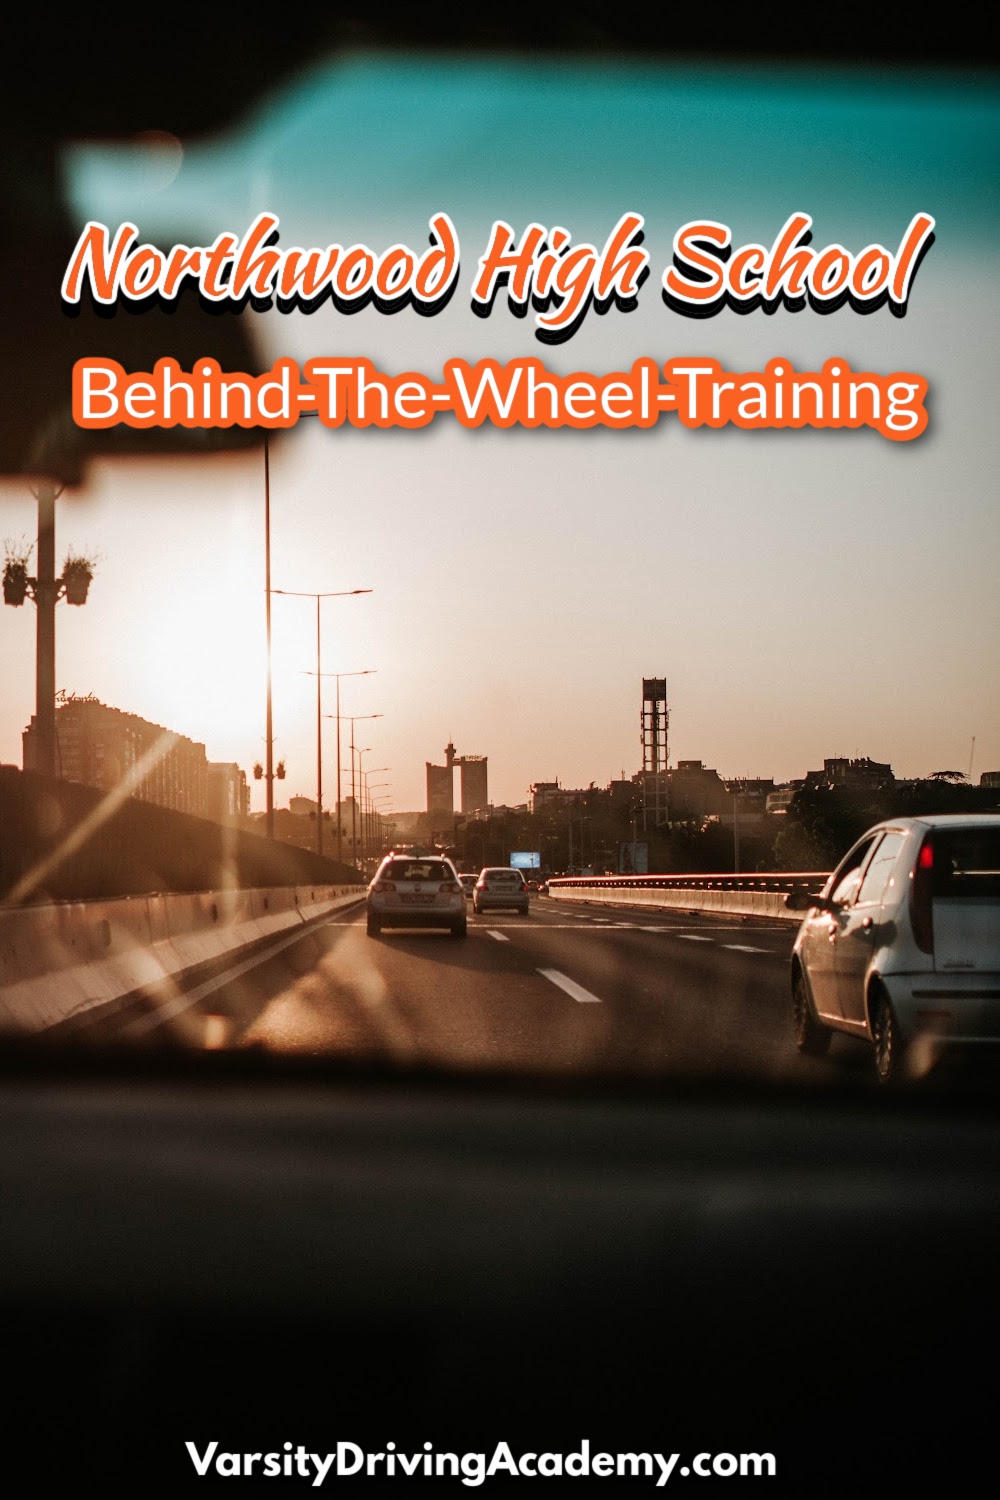 Varsity Driving Academy offers the best Northwood High School behind the wheel training for teens to learn defensive driving.